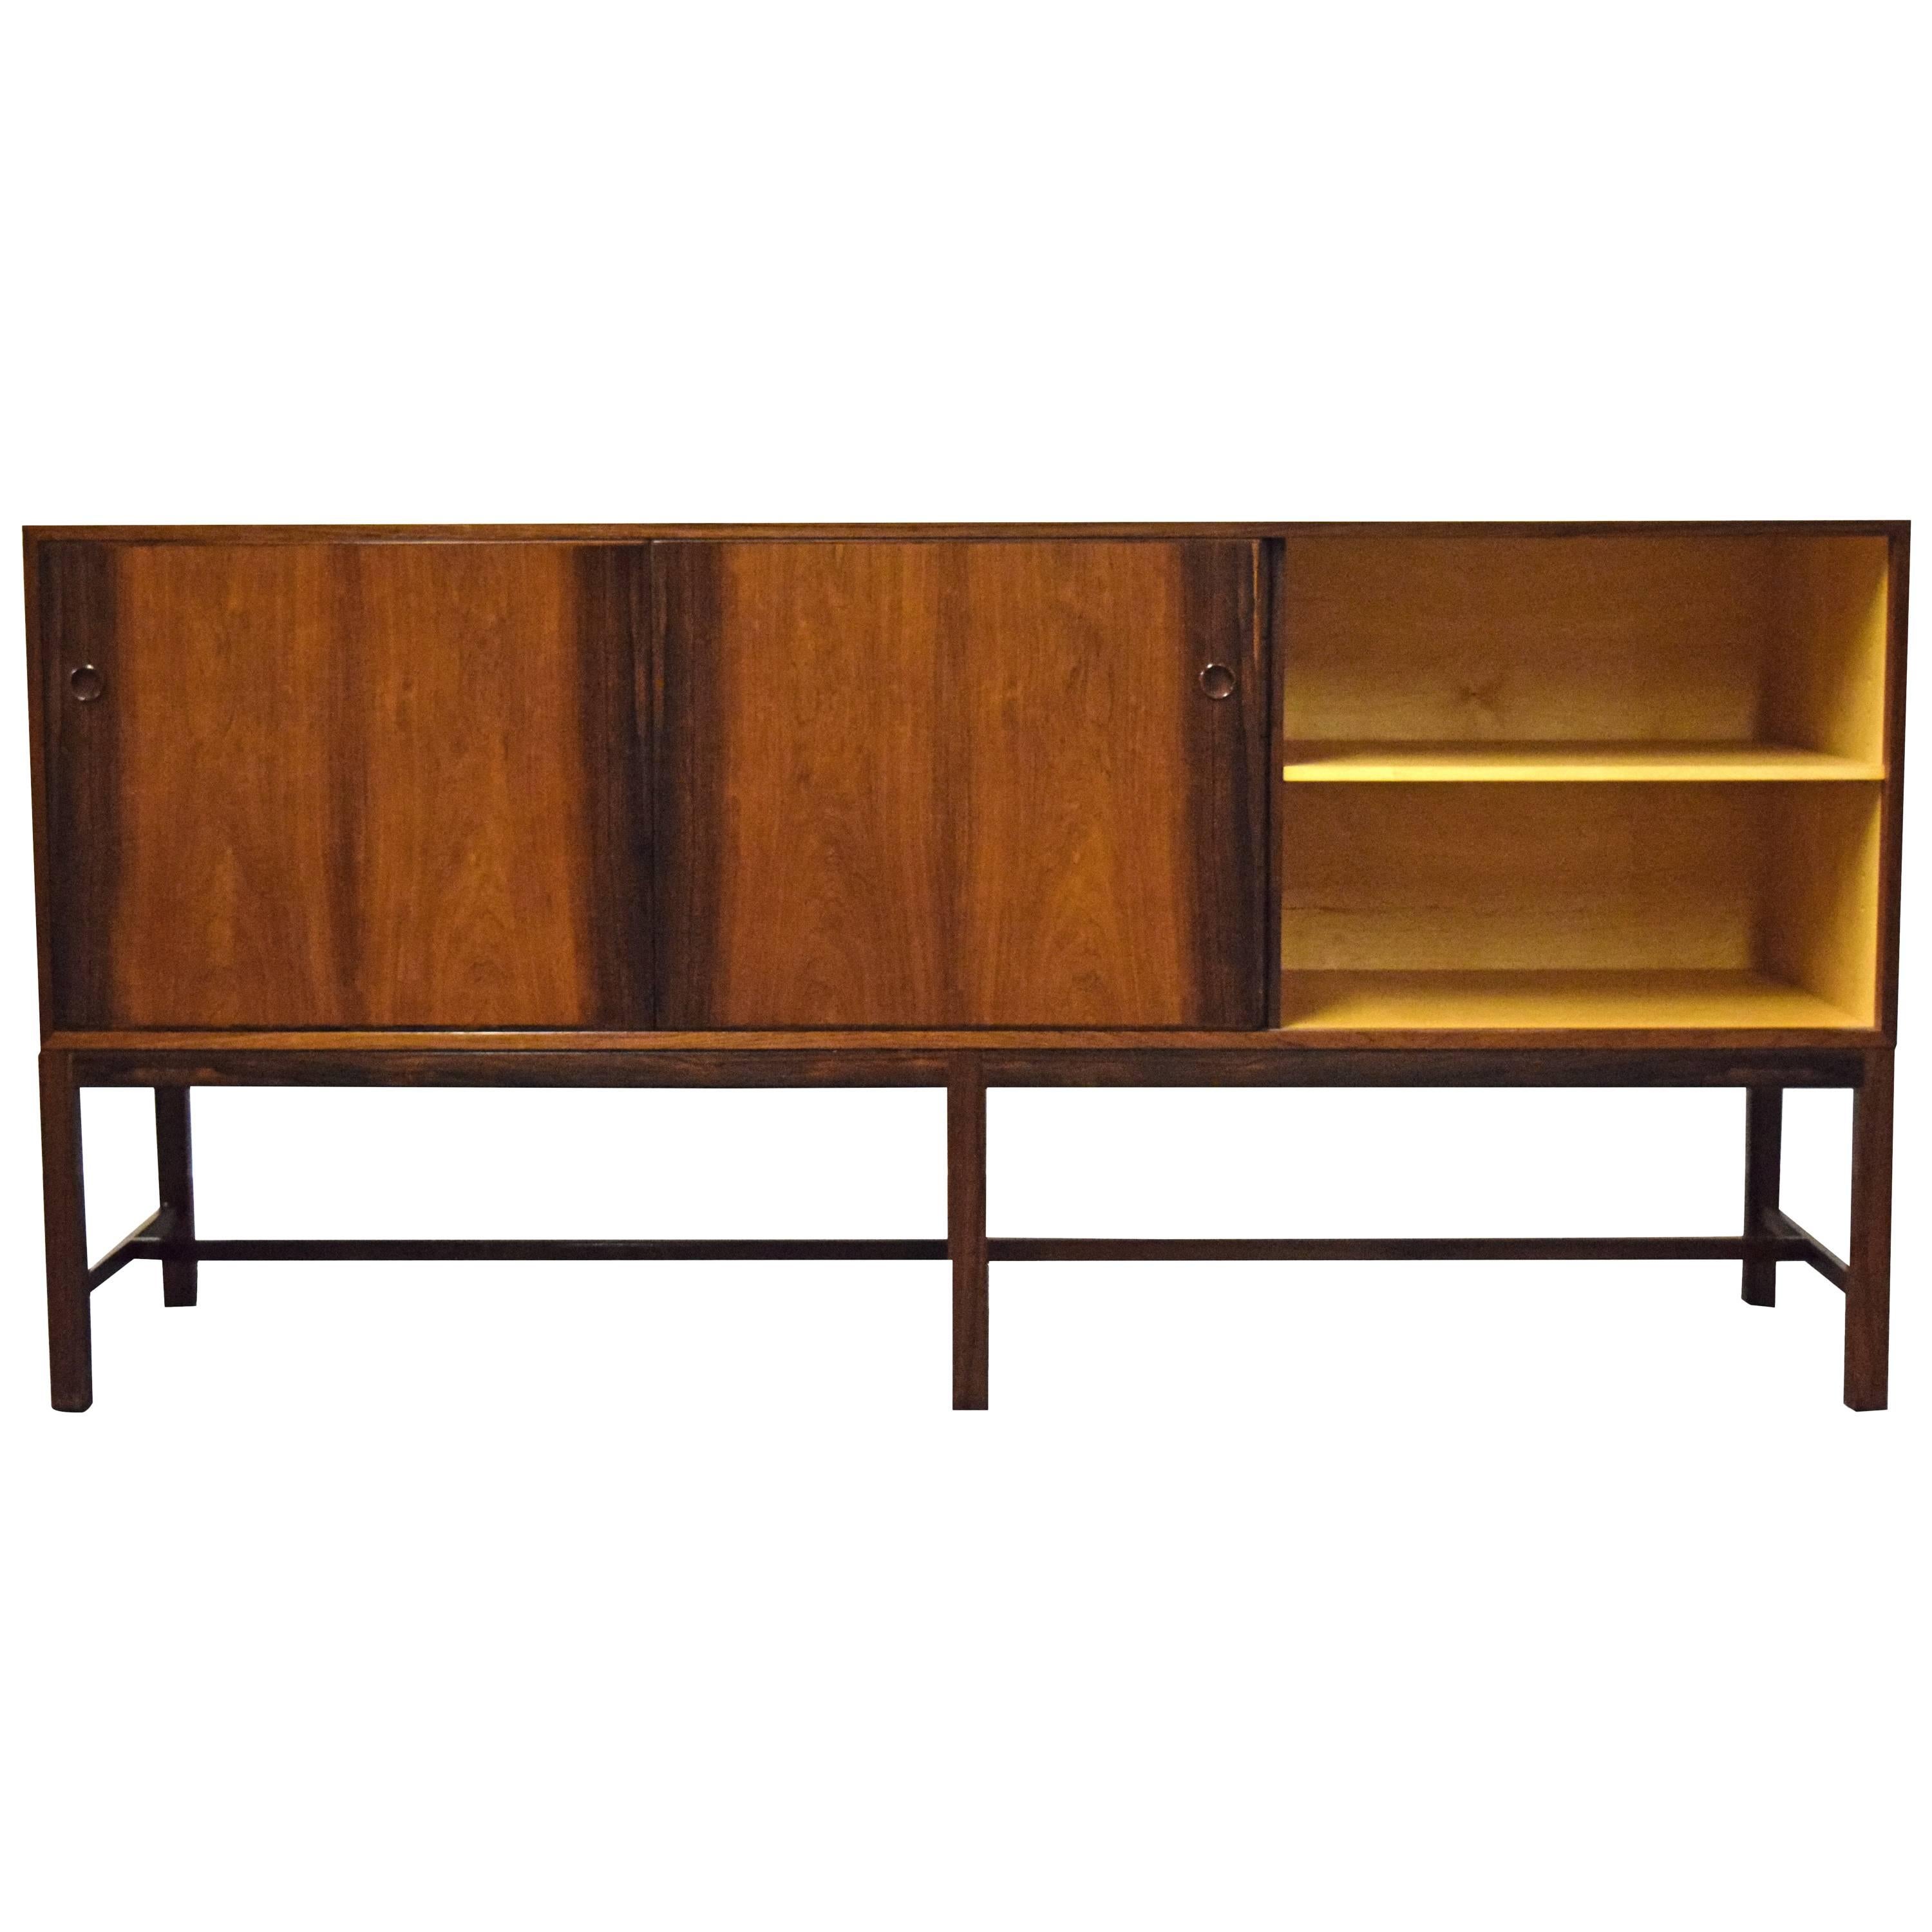 Danish modern rosewood credenza 

Sideboard made in Denmark and imported by John Stuart.